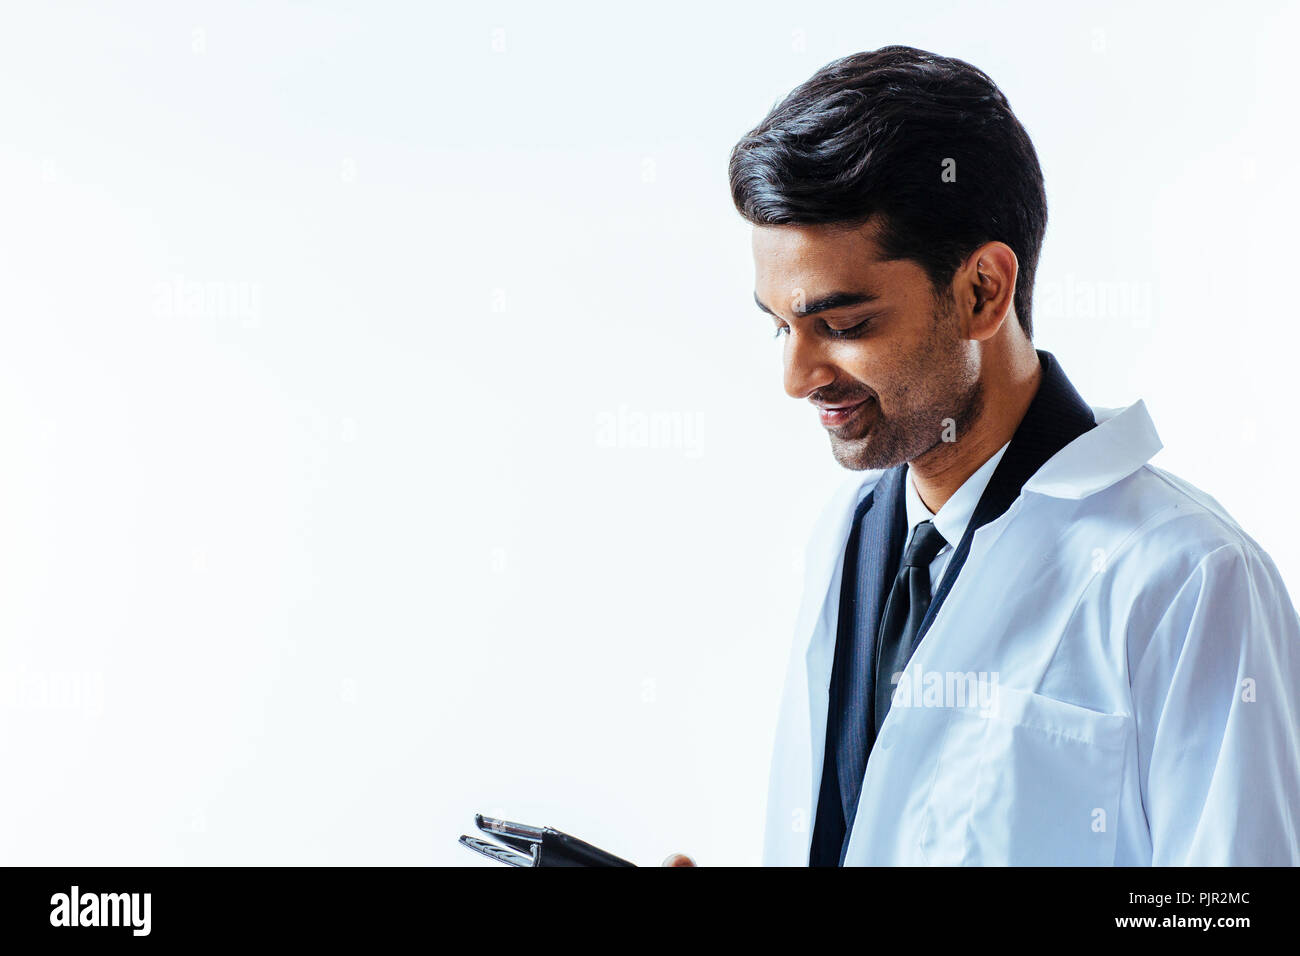 Profile portrait of a man in business suit and lab coat holding a folder, isolated on white studio background Stock Photo